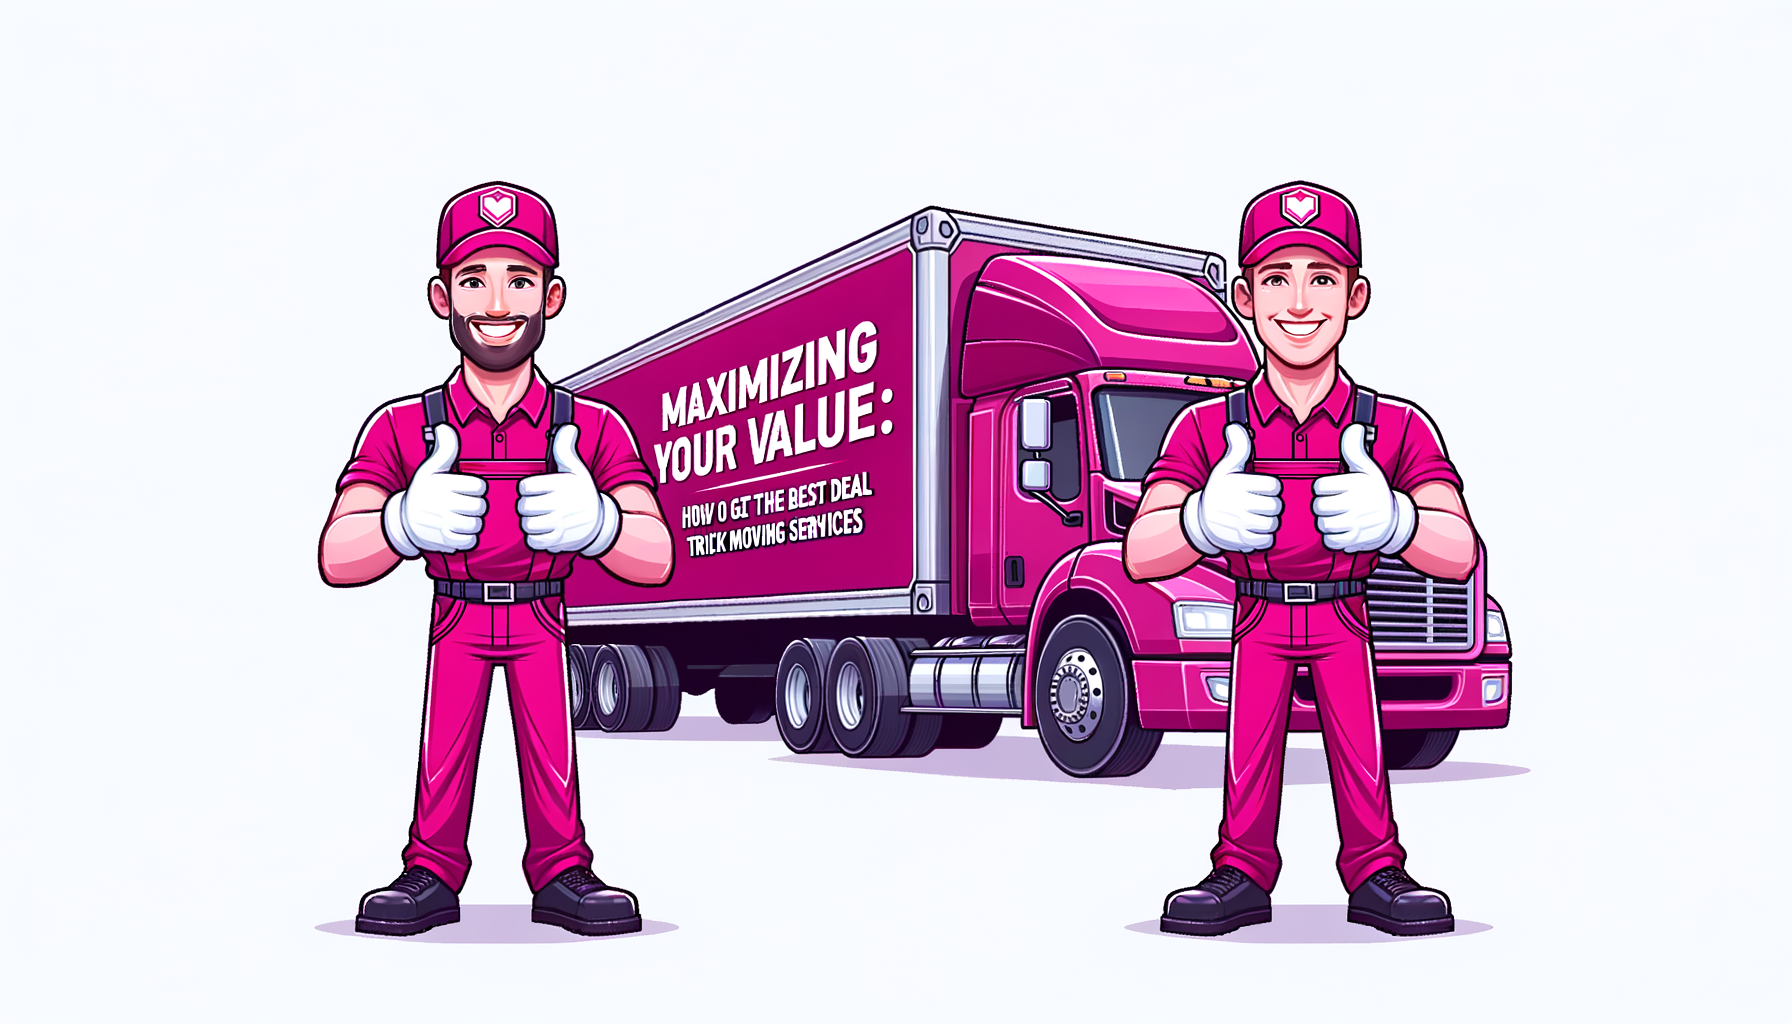 Cartoon illustration of two men in fuschia uniforms, smiling and giving a thumbs up in front of a moving truck, symbolizing maximizing value and getting the best deal with Two Men and a Truck.